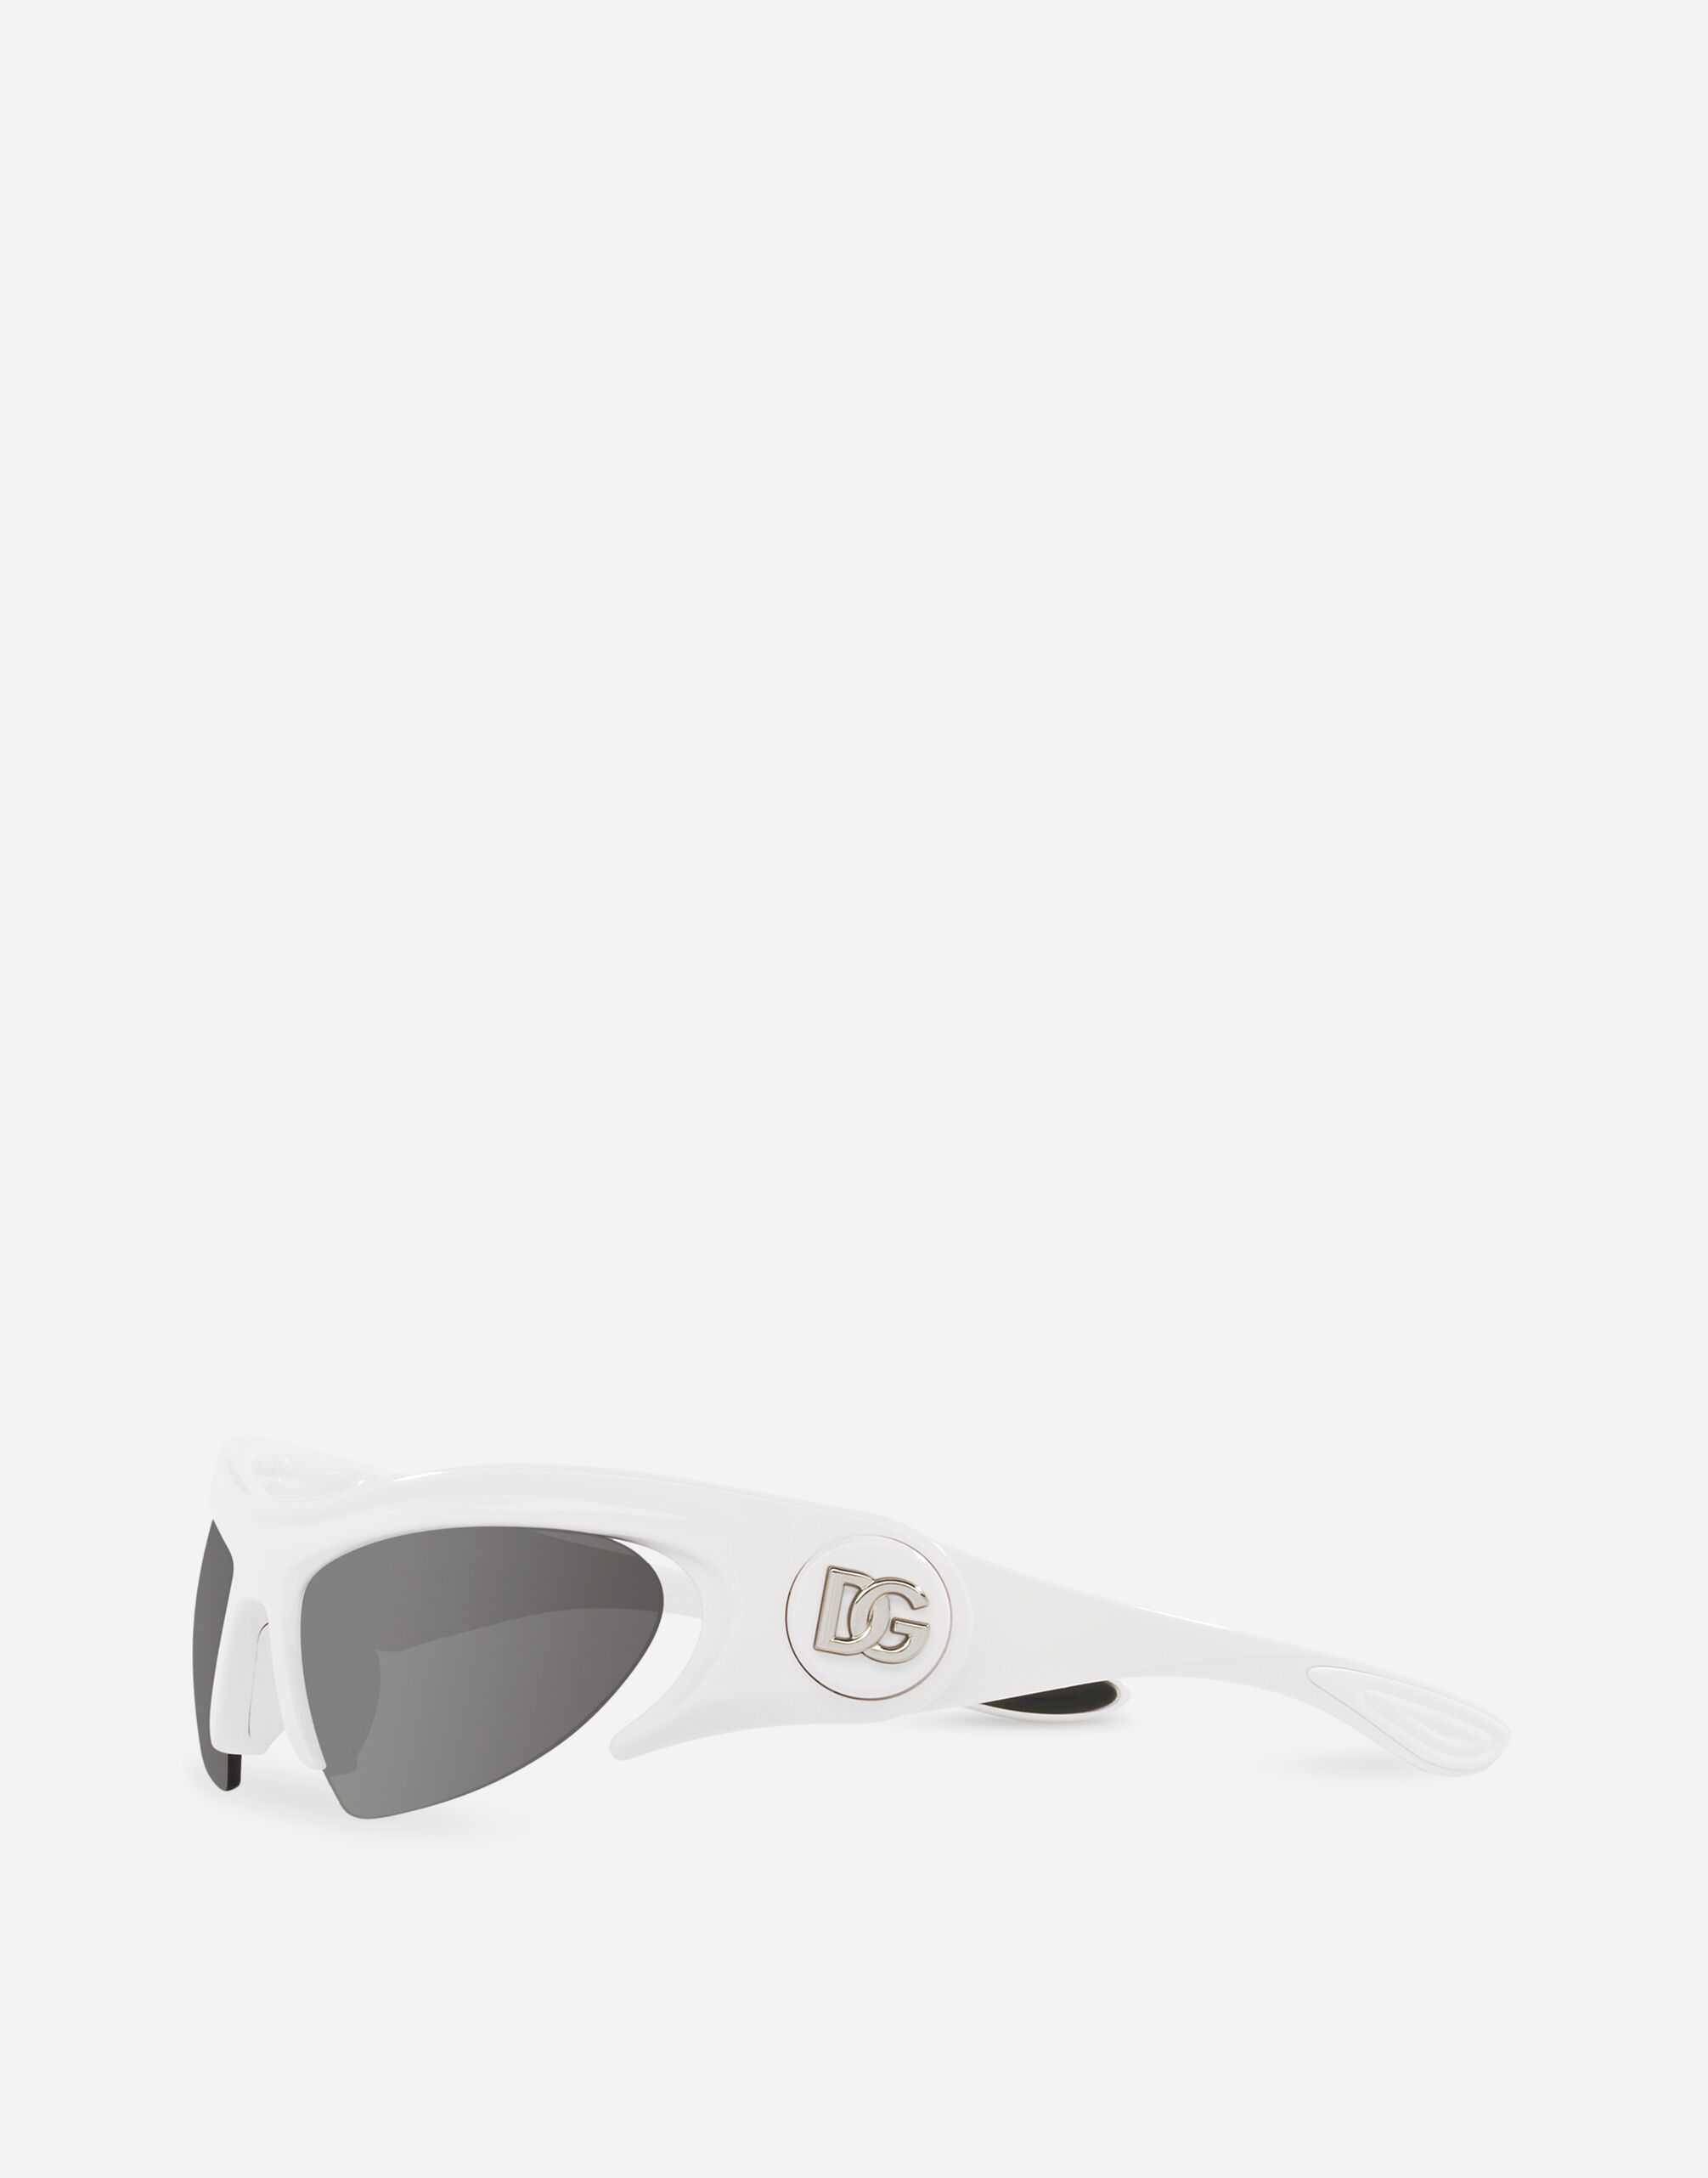 DG Toy sunglasses in White for | Dolce&Gabbana® US